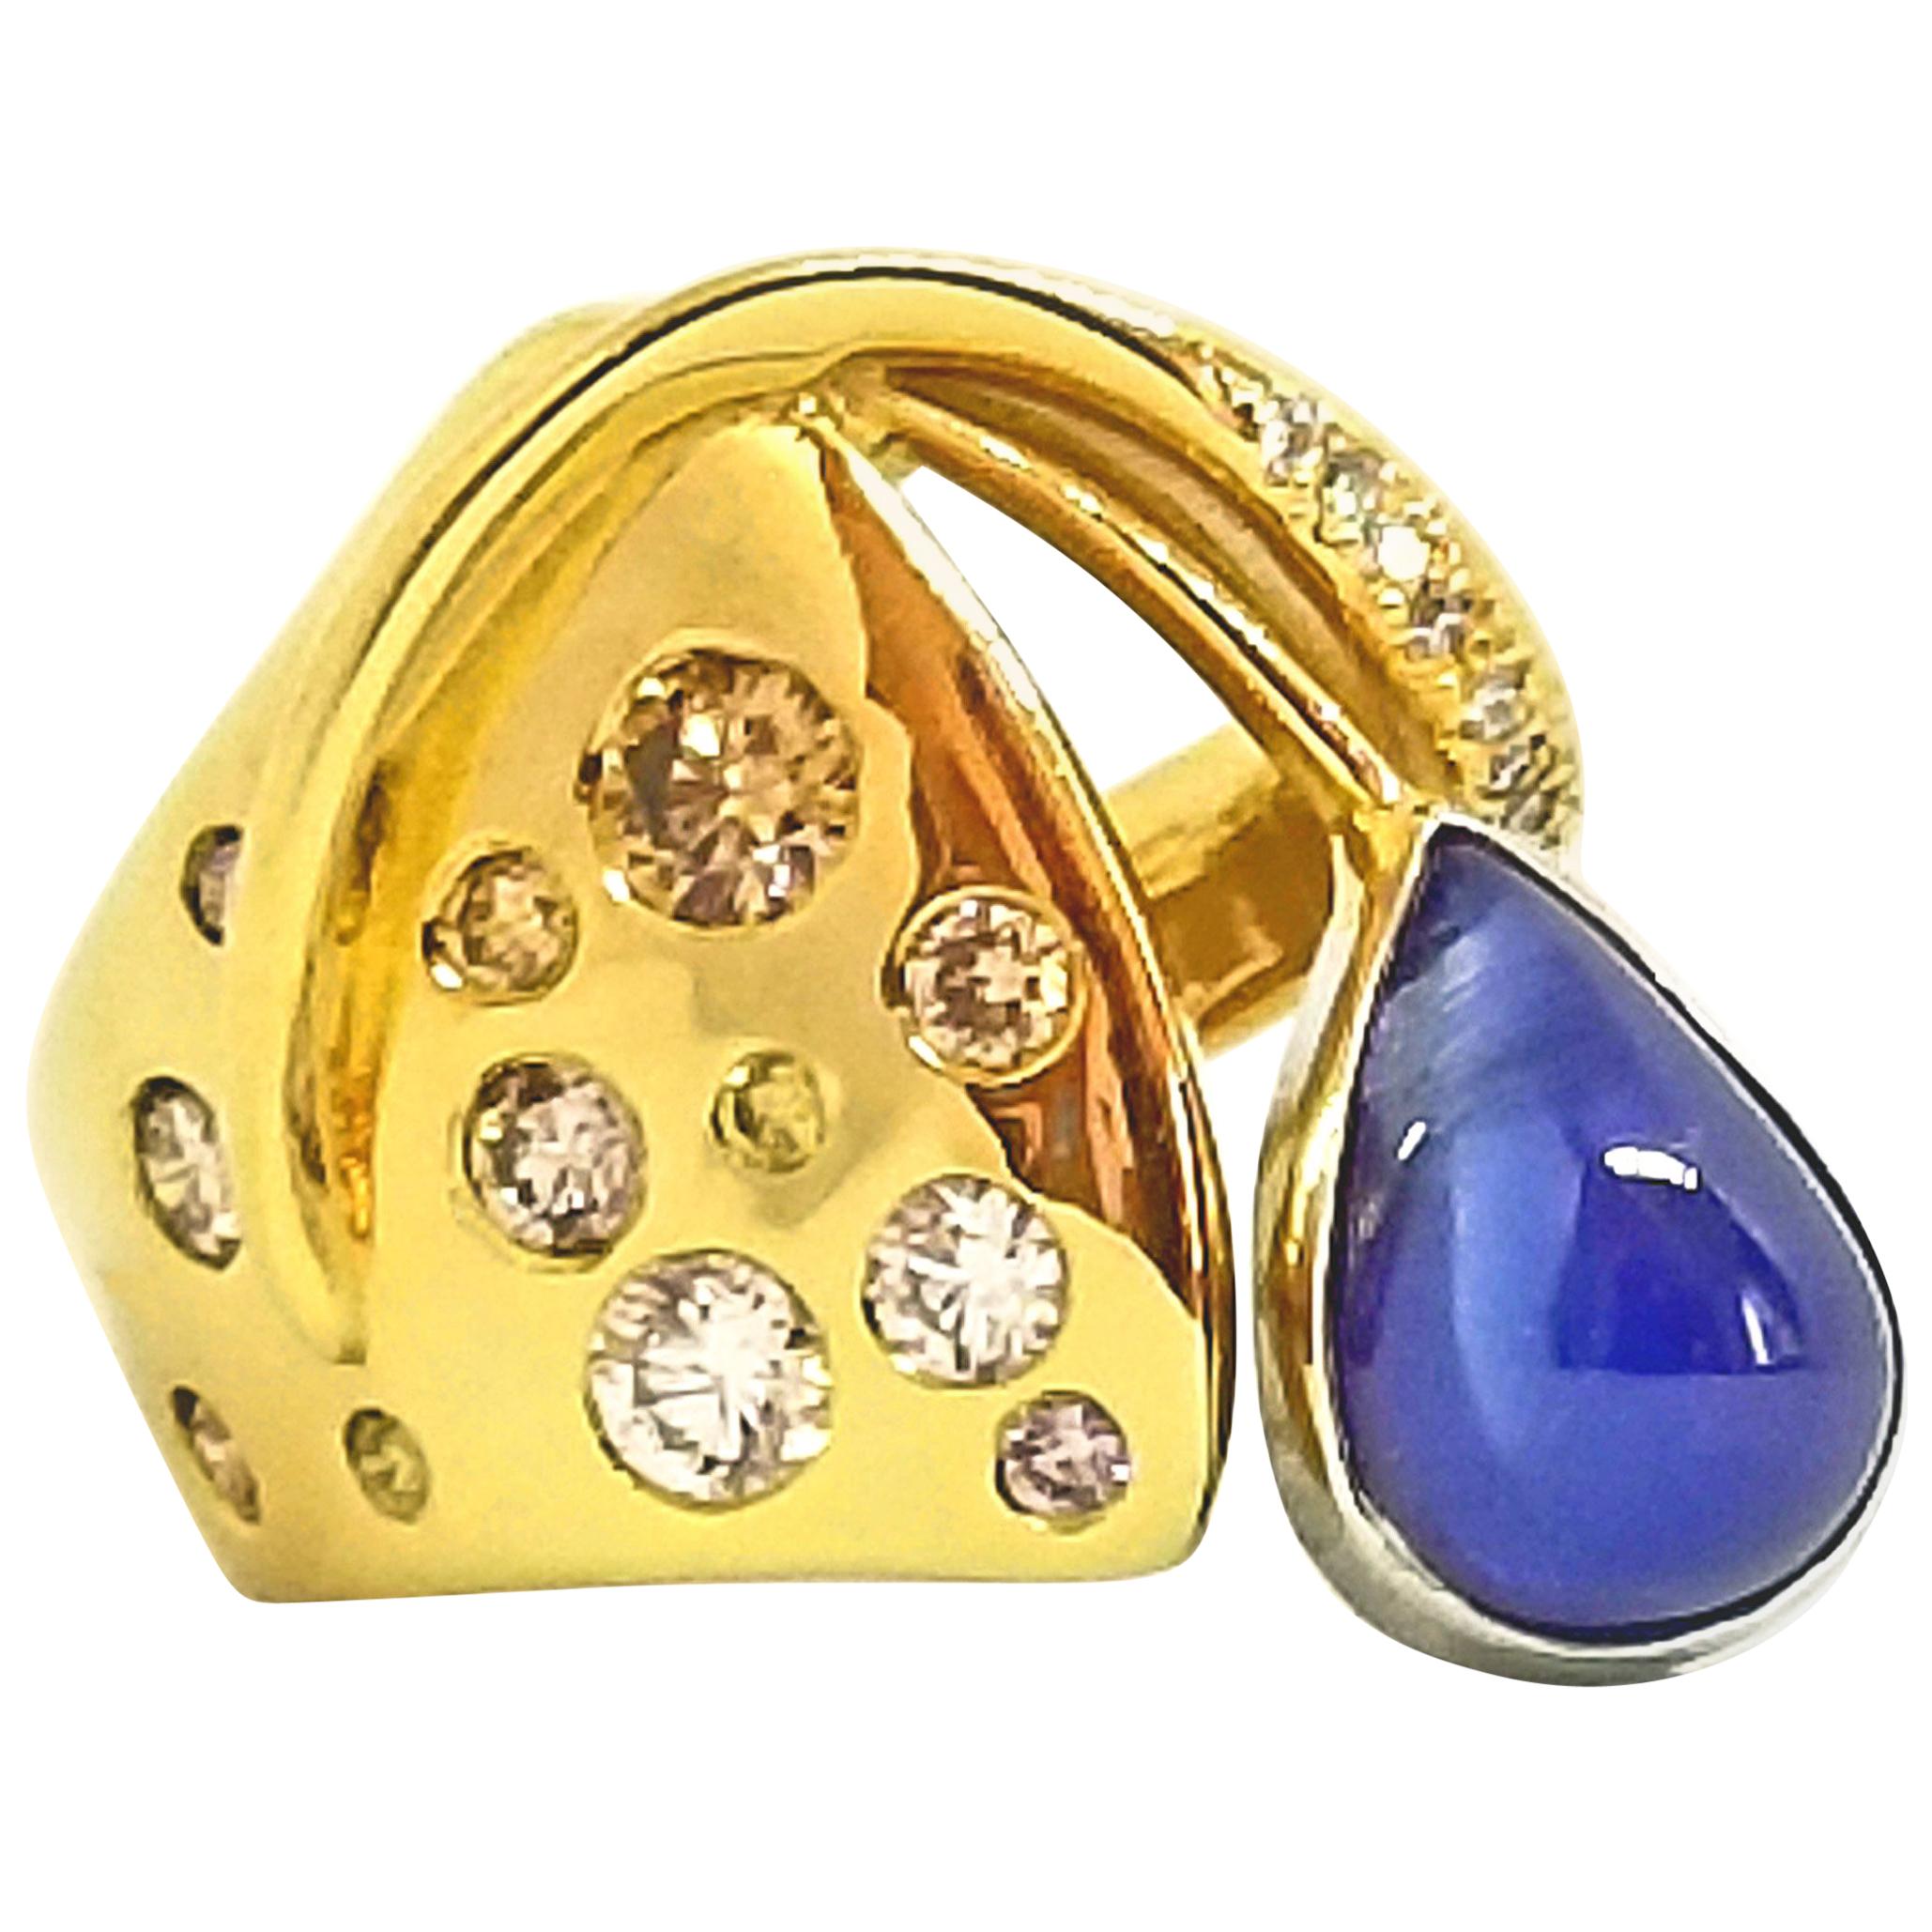 This one of a kind, artist designed and crafted Statement Ring features a 5.51 carat Sugarloaf Sapphire. The Tear Drop Shaped stone is a Translucent Medium Blue and is Bezel set in 18K White Gold. The Contemporary Asymmetric ring is Highly Polished